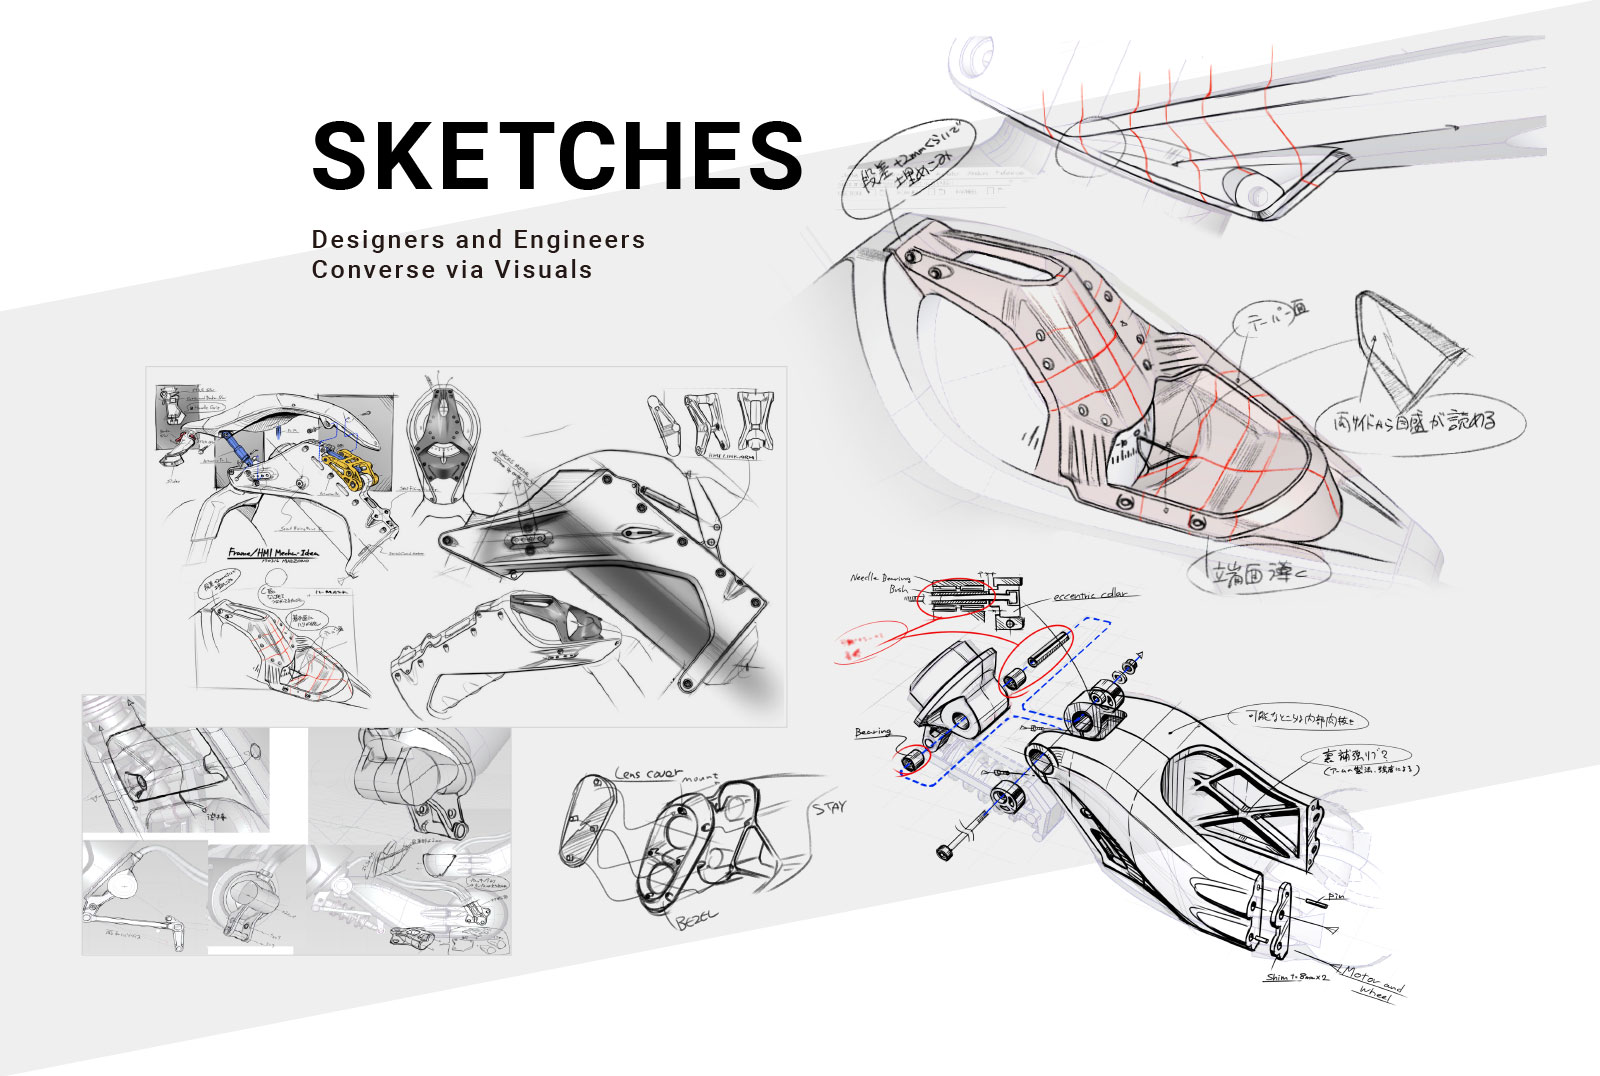 SKETCHES Designers and Engineers Converse via Visuals